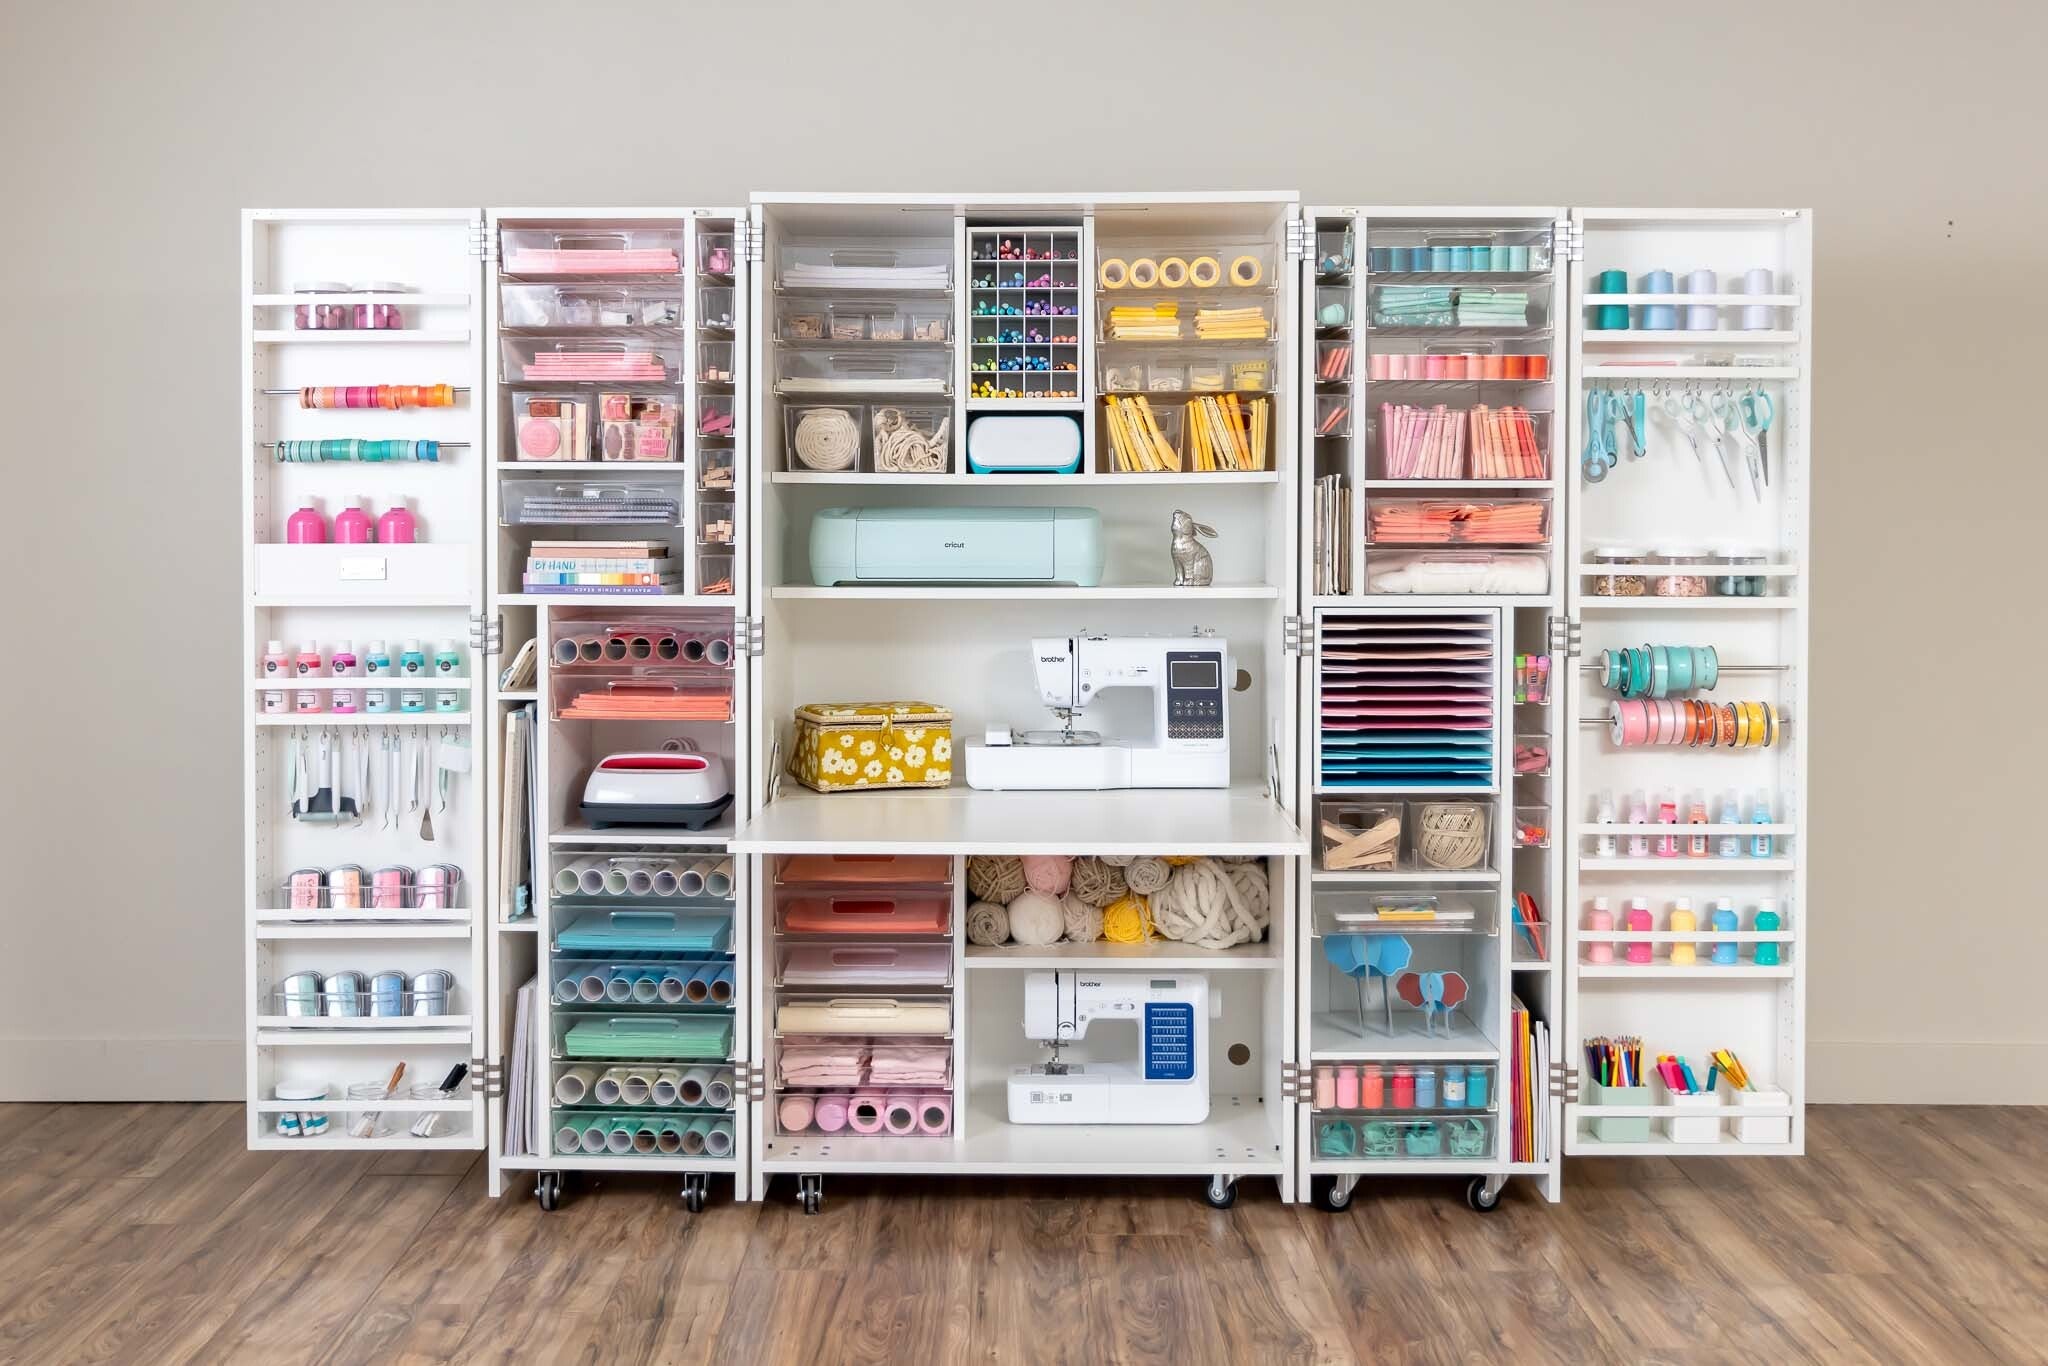 DreamBox Craft Station by Craft Room Hides Within a Cabinet  Craft storage  cabinets, Sewing room design, Craft tables with storage